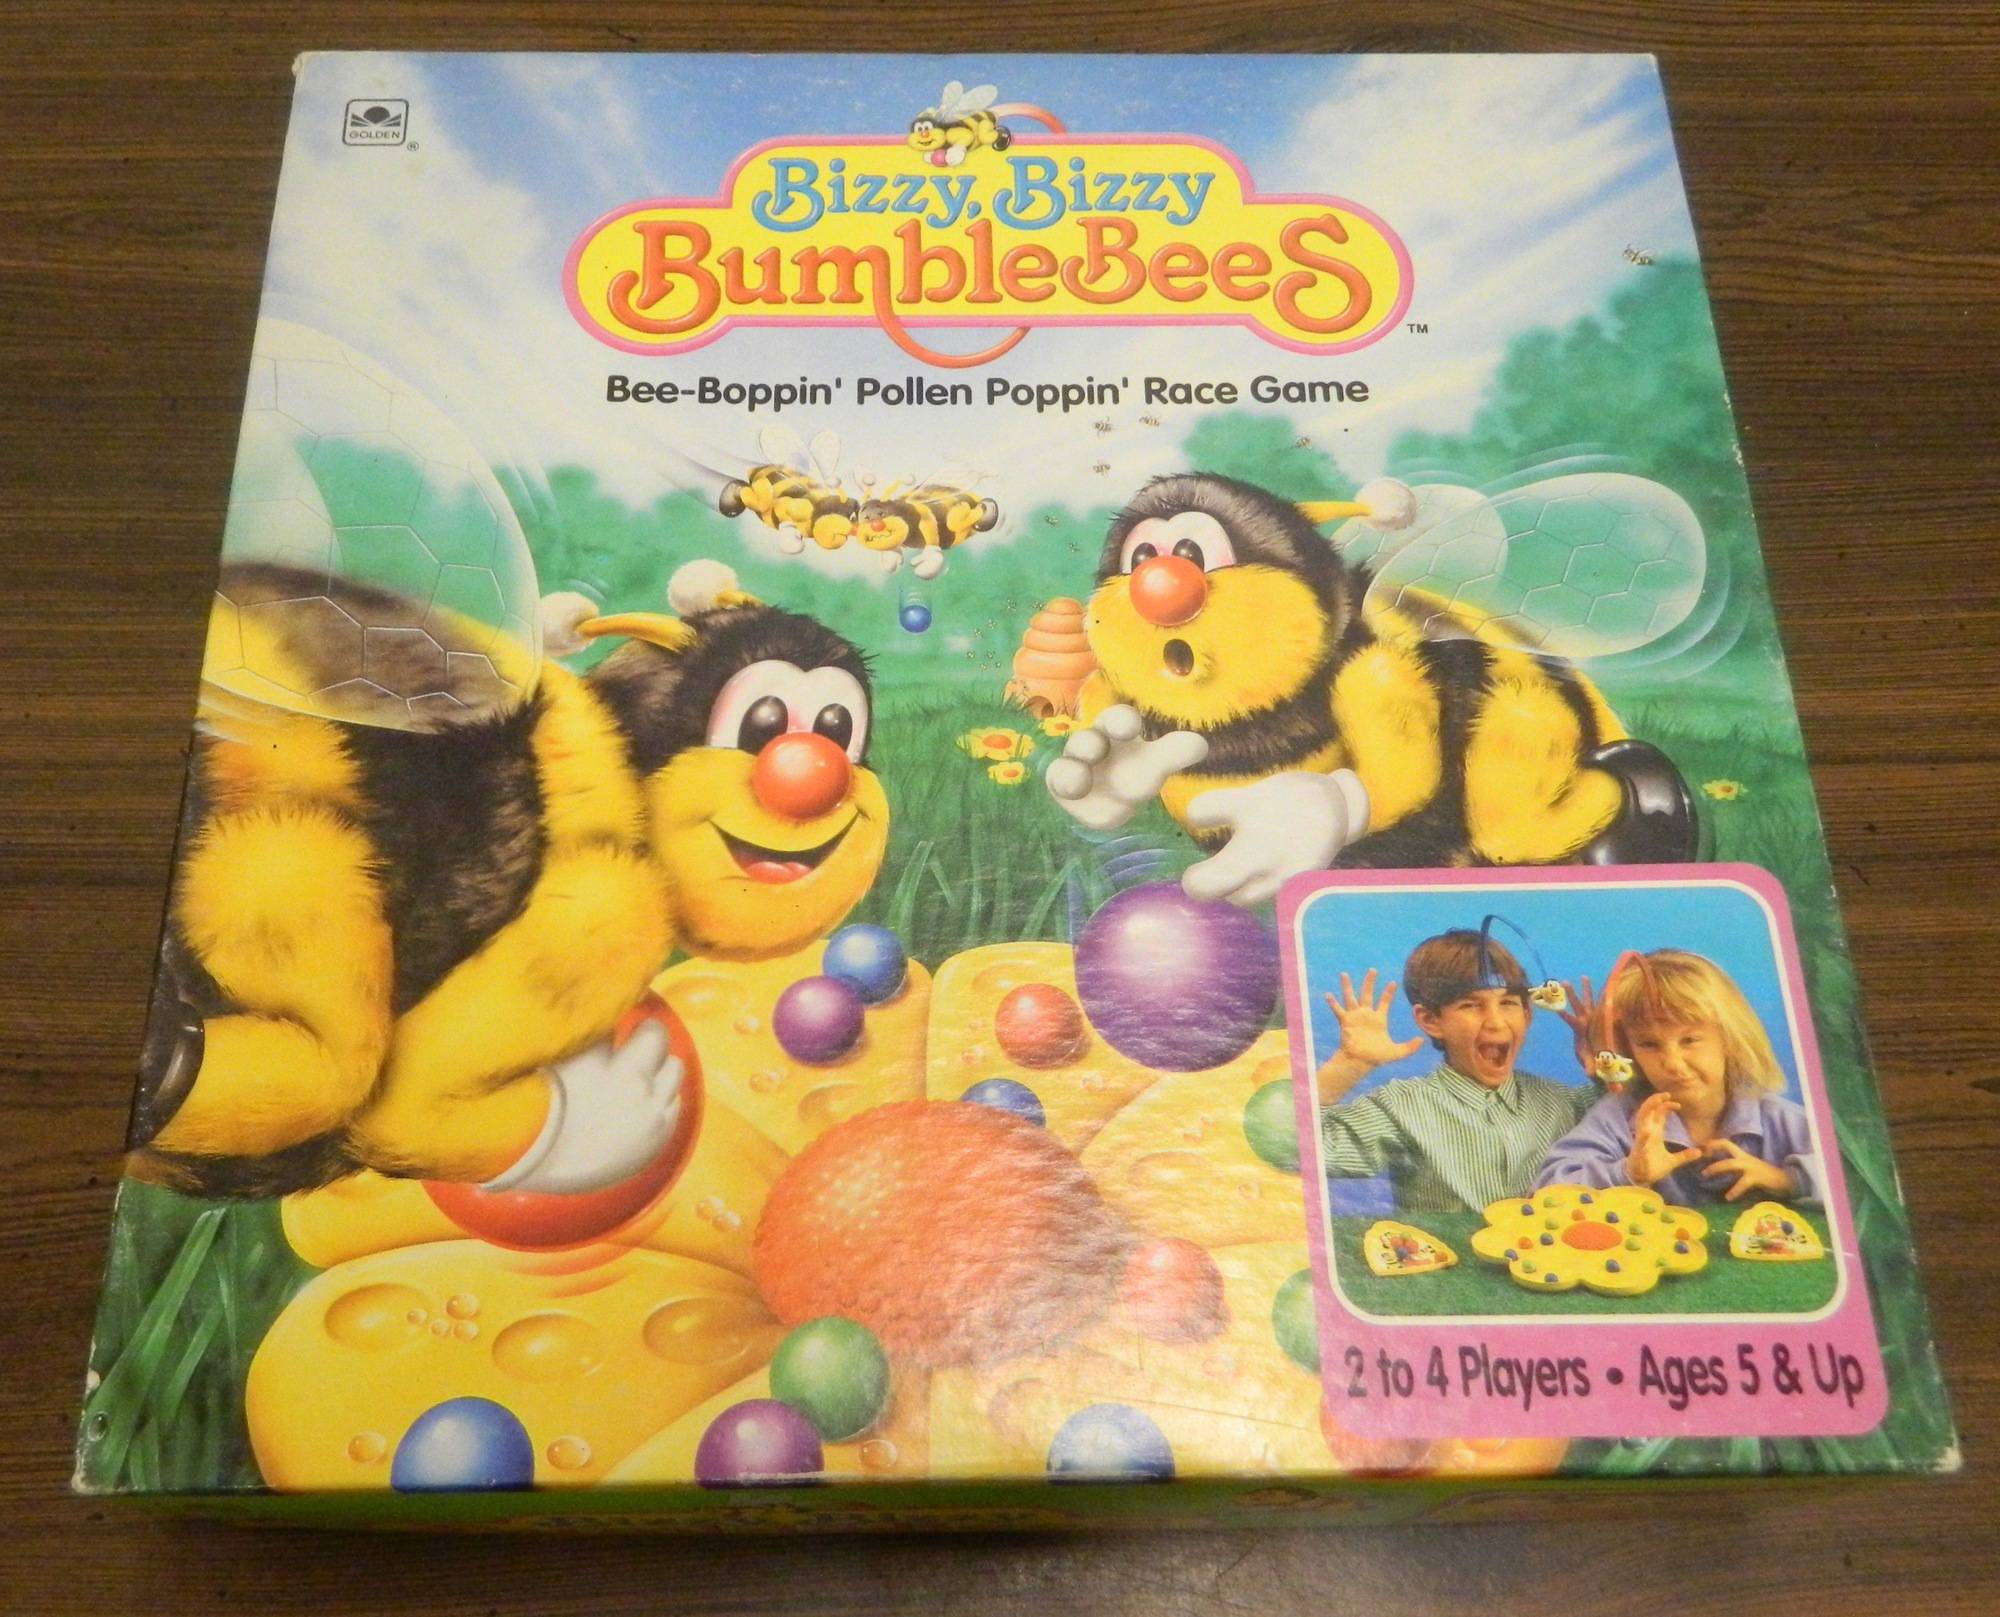 Box for Bizzy, Bizzy Bumblebees